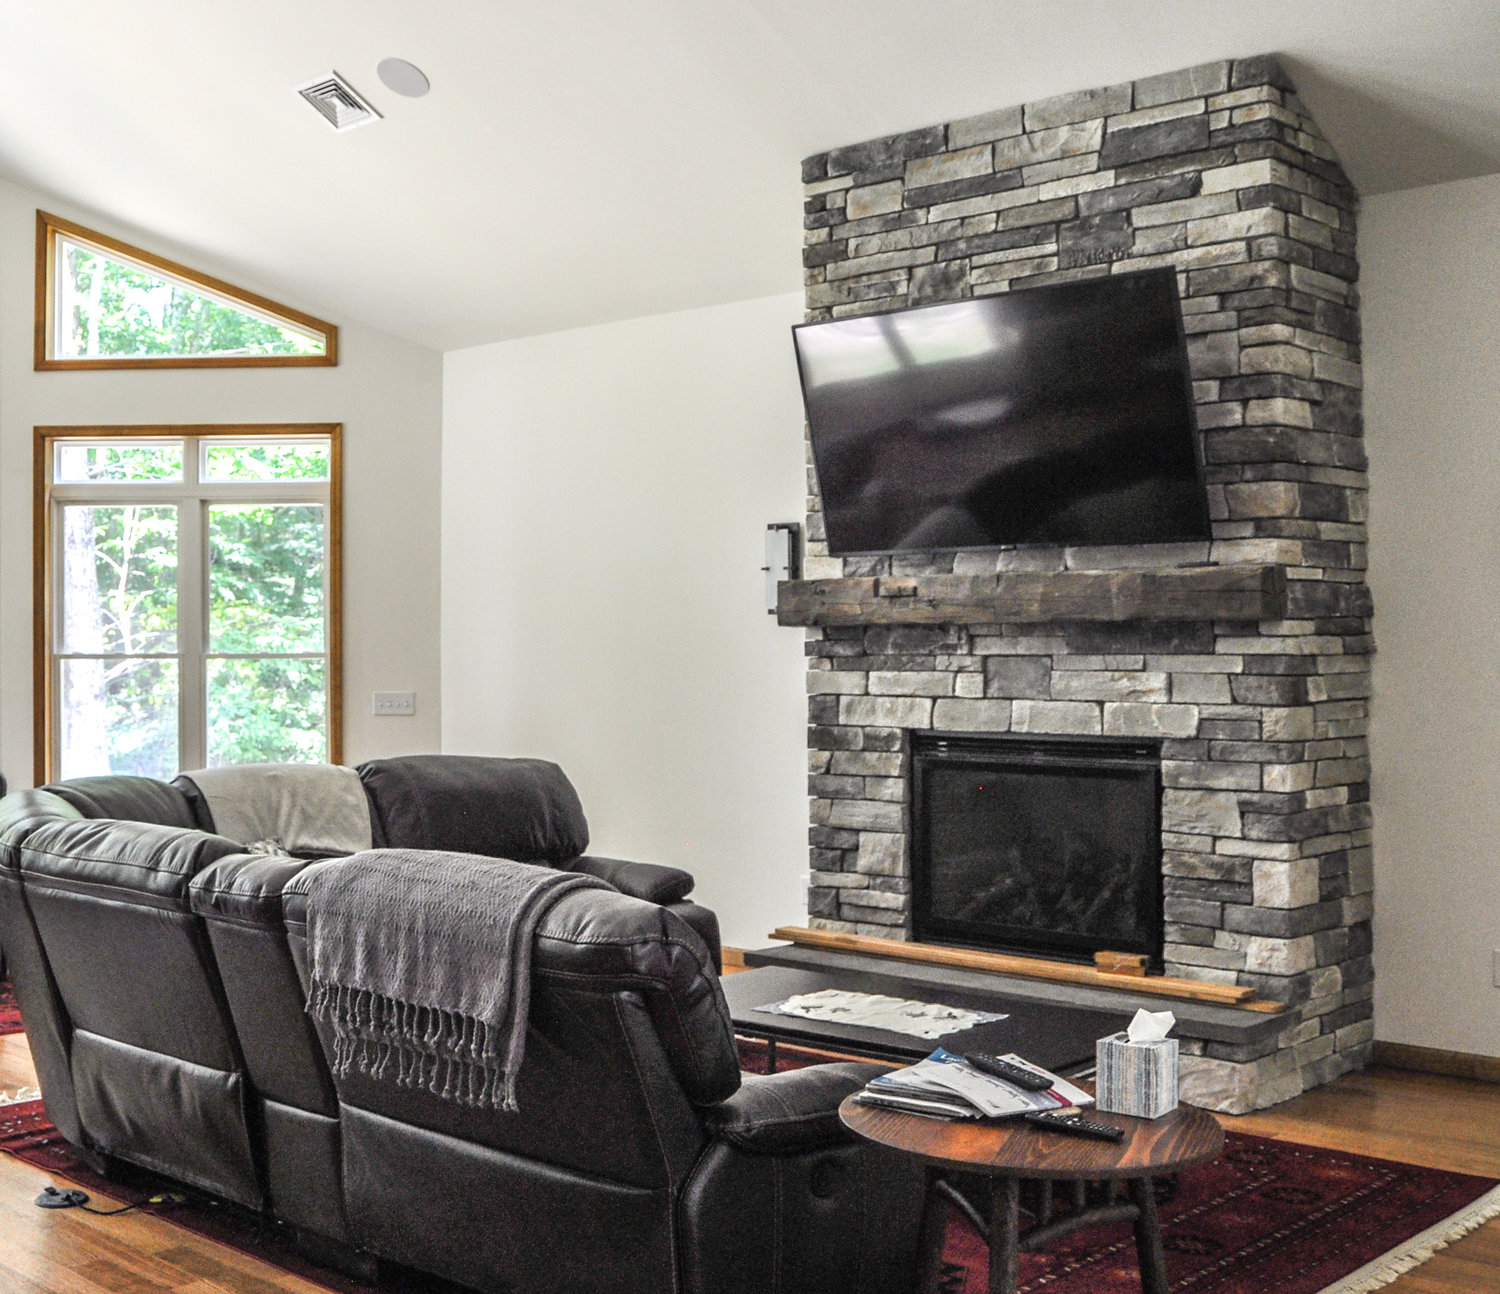 The fireplace draws the eye in the living room and promises warmth come winter.